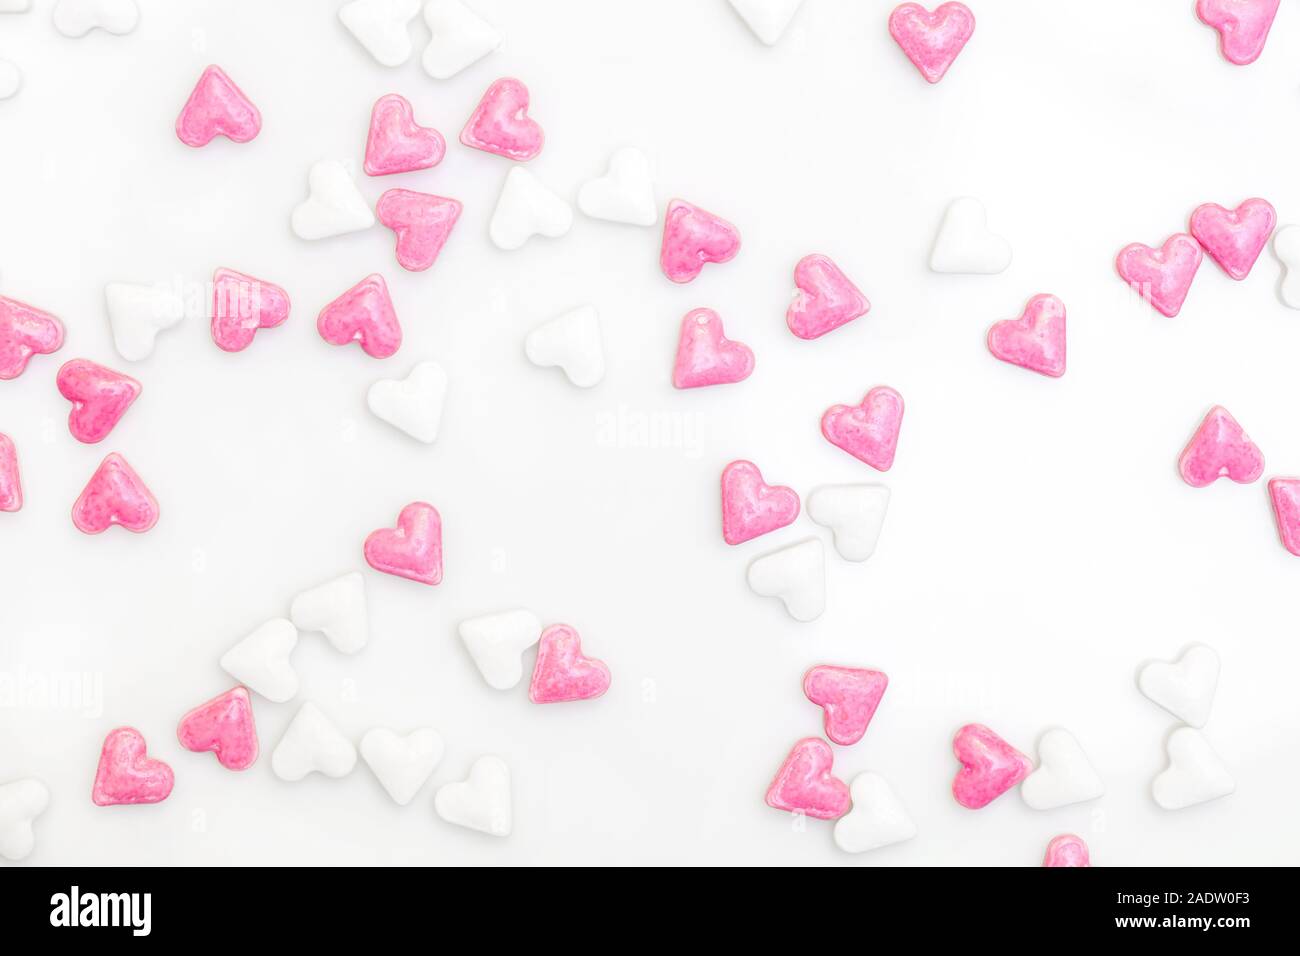 sugar hearts colored white and pink, spreading on white background, concept love card Stock Photo